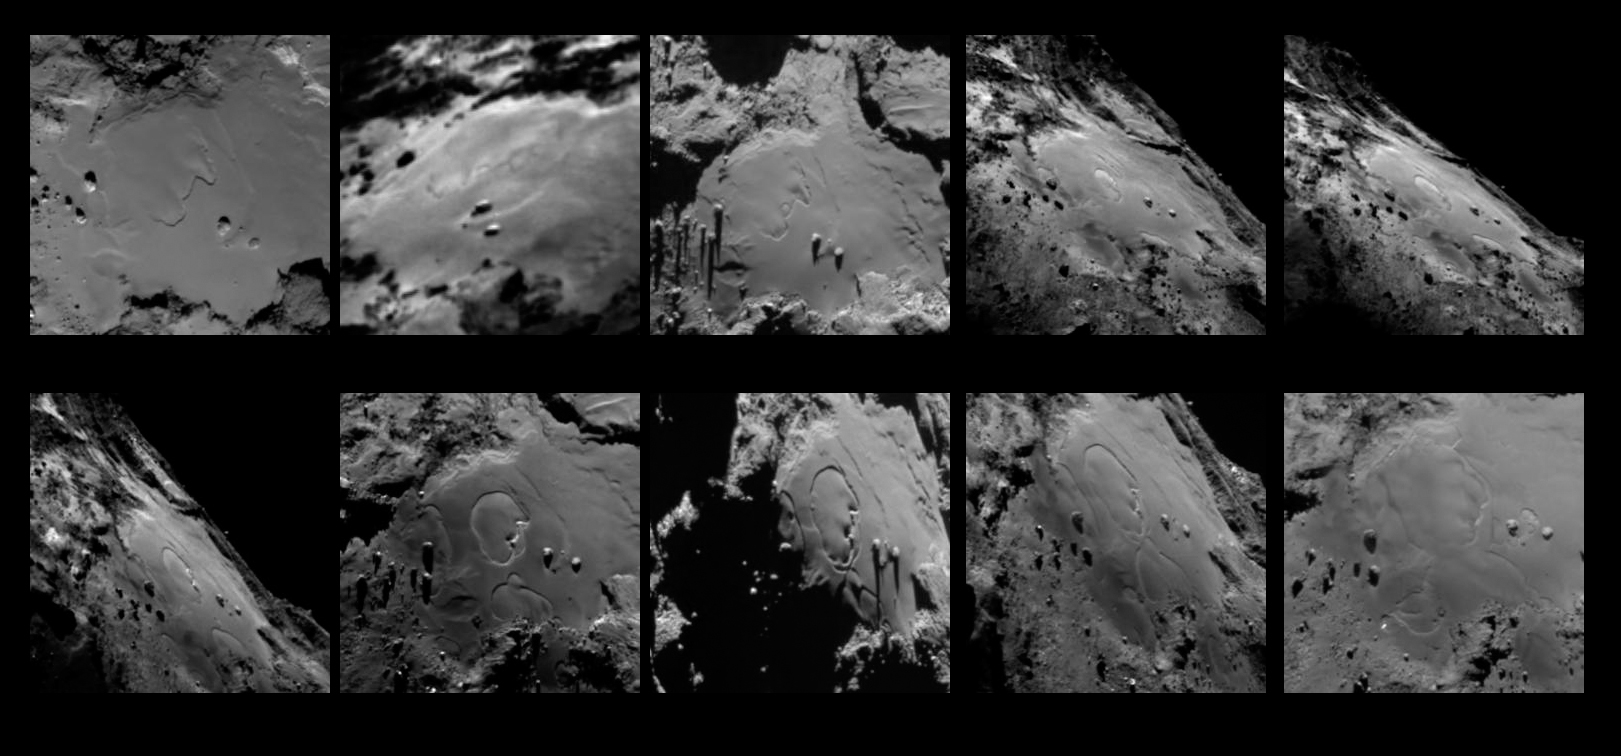 Sequence of images showing the surface changes in the region. Image Credit: ESA/Rosetta/MPS for OSIRIS Team MPS/UPD/LAM/IAA/SSO/INTA/UPM/DASP/IDA